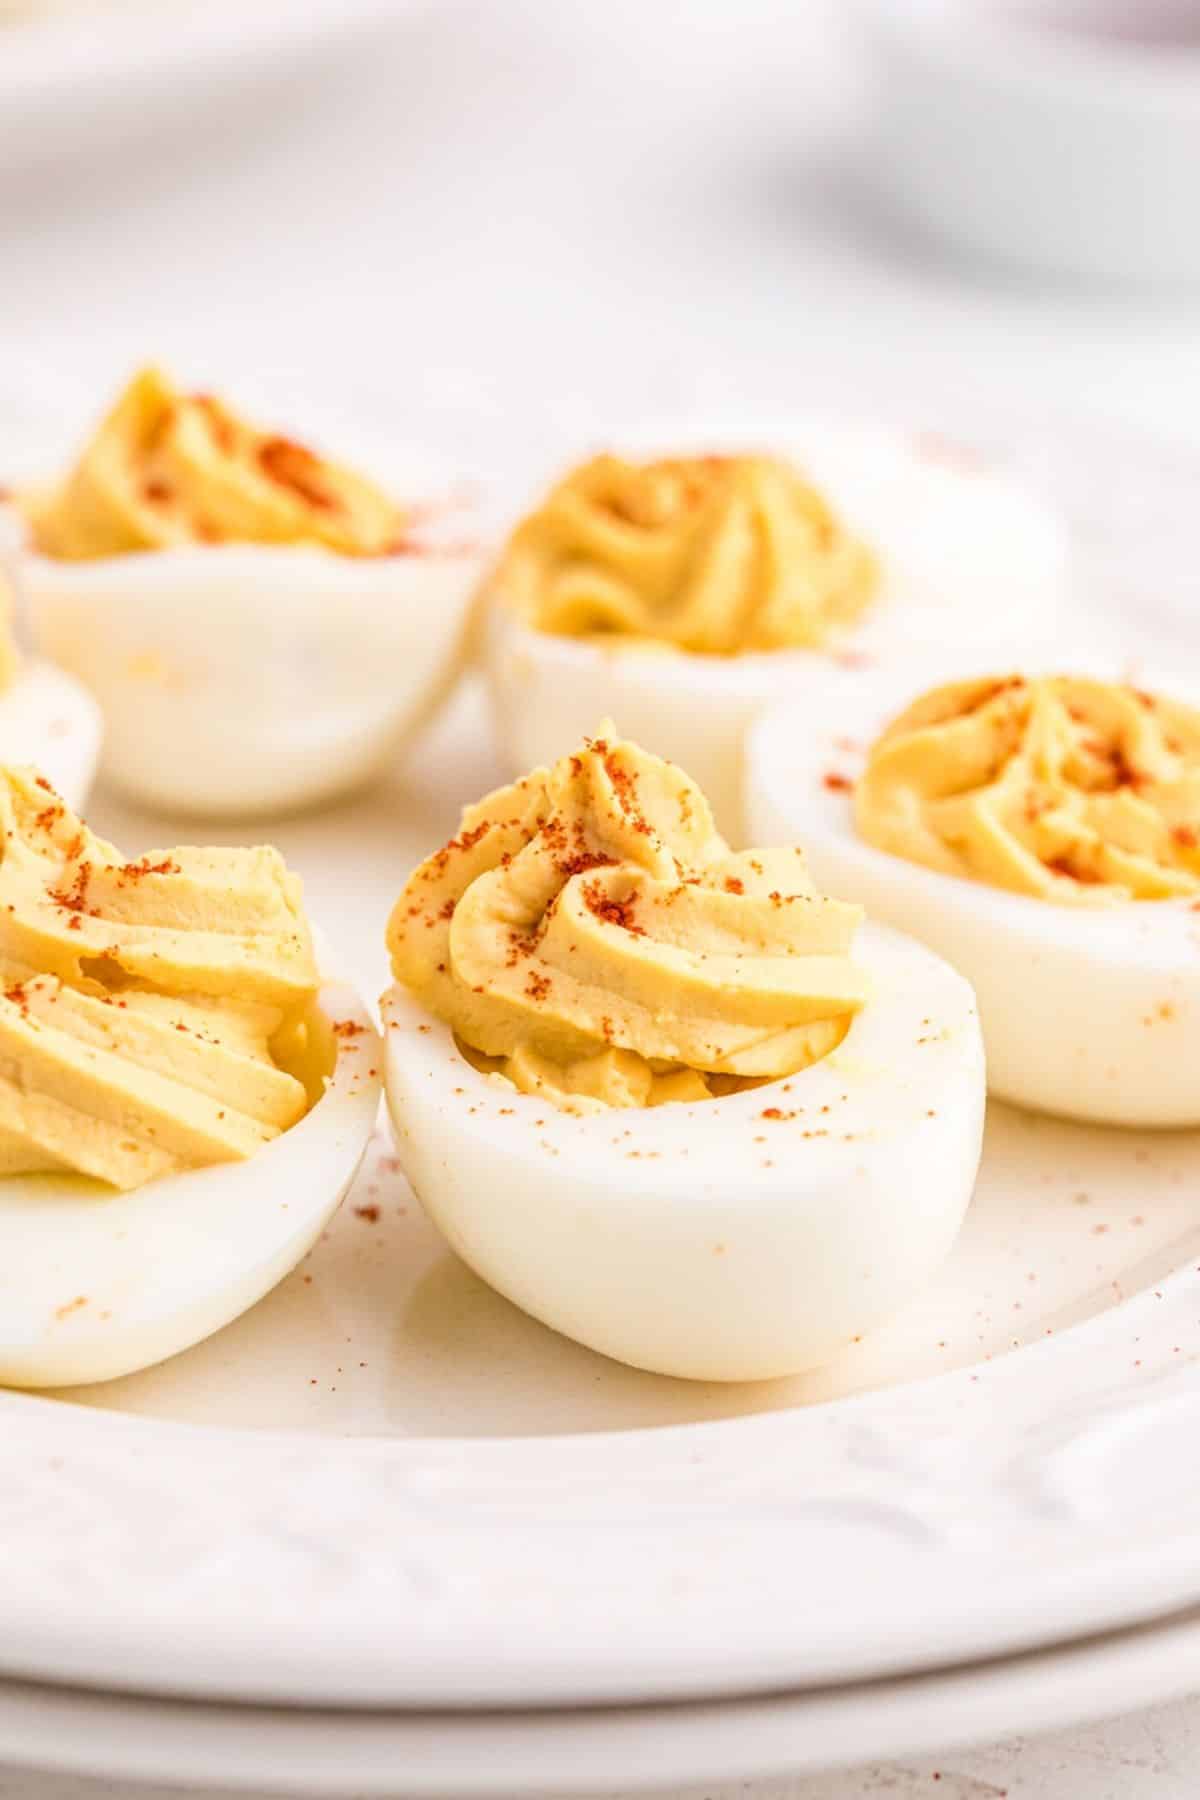 Deviled eggs with paprika on a plate.